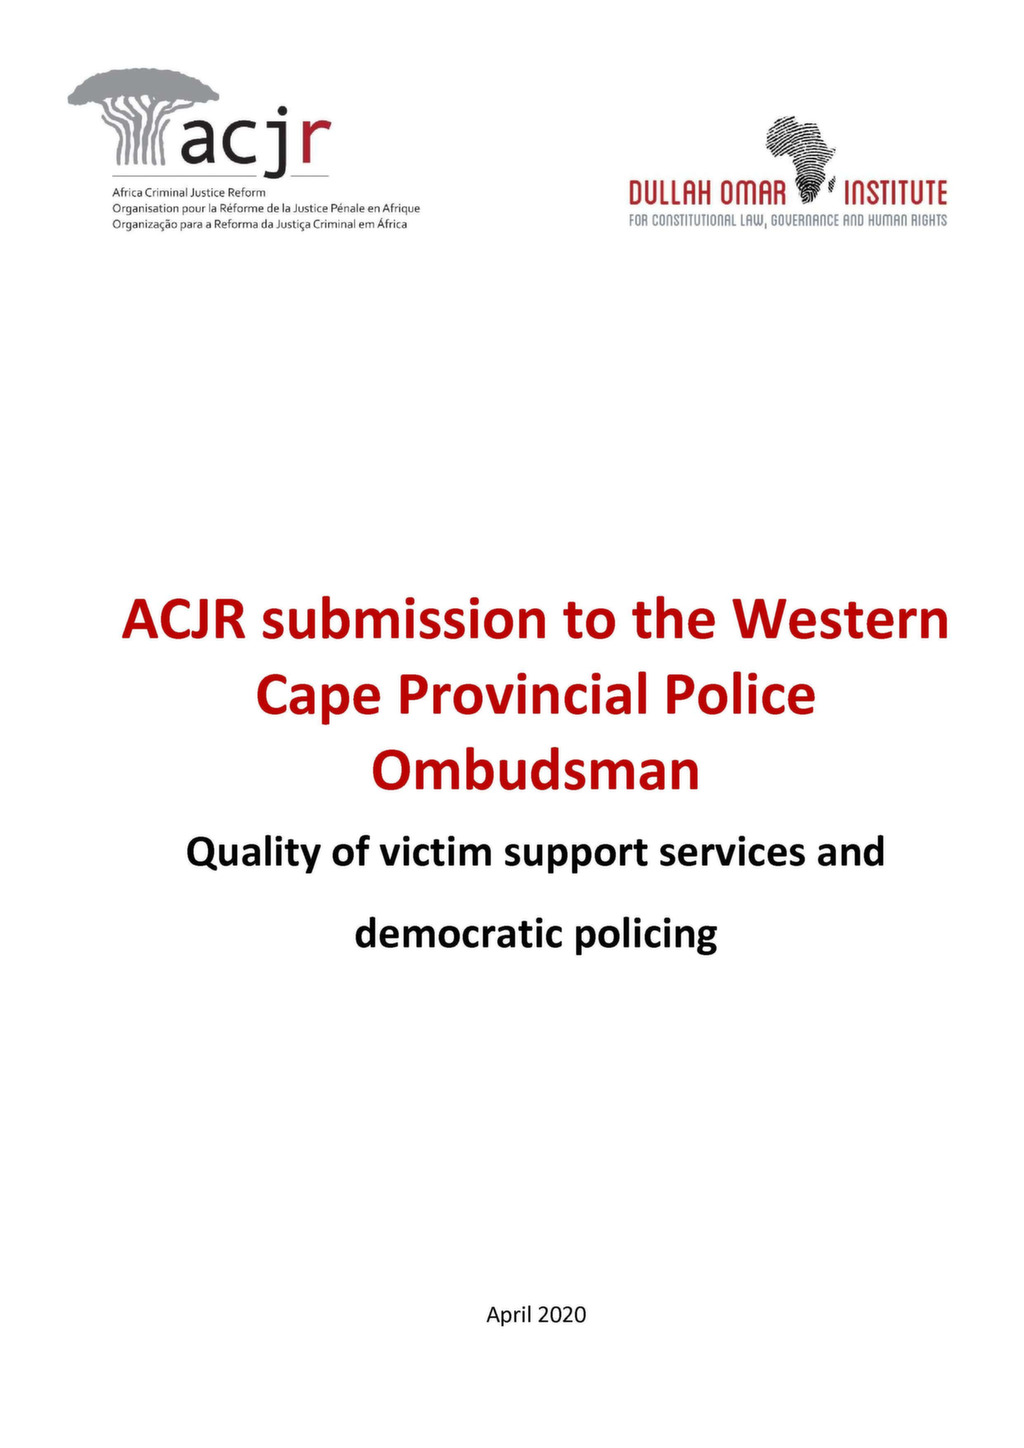 Submission to Western Cape Police ombudsman